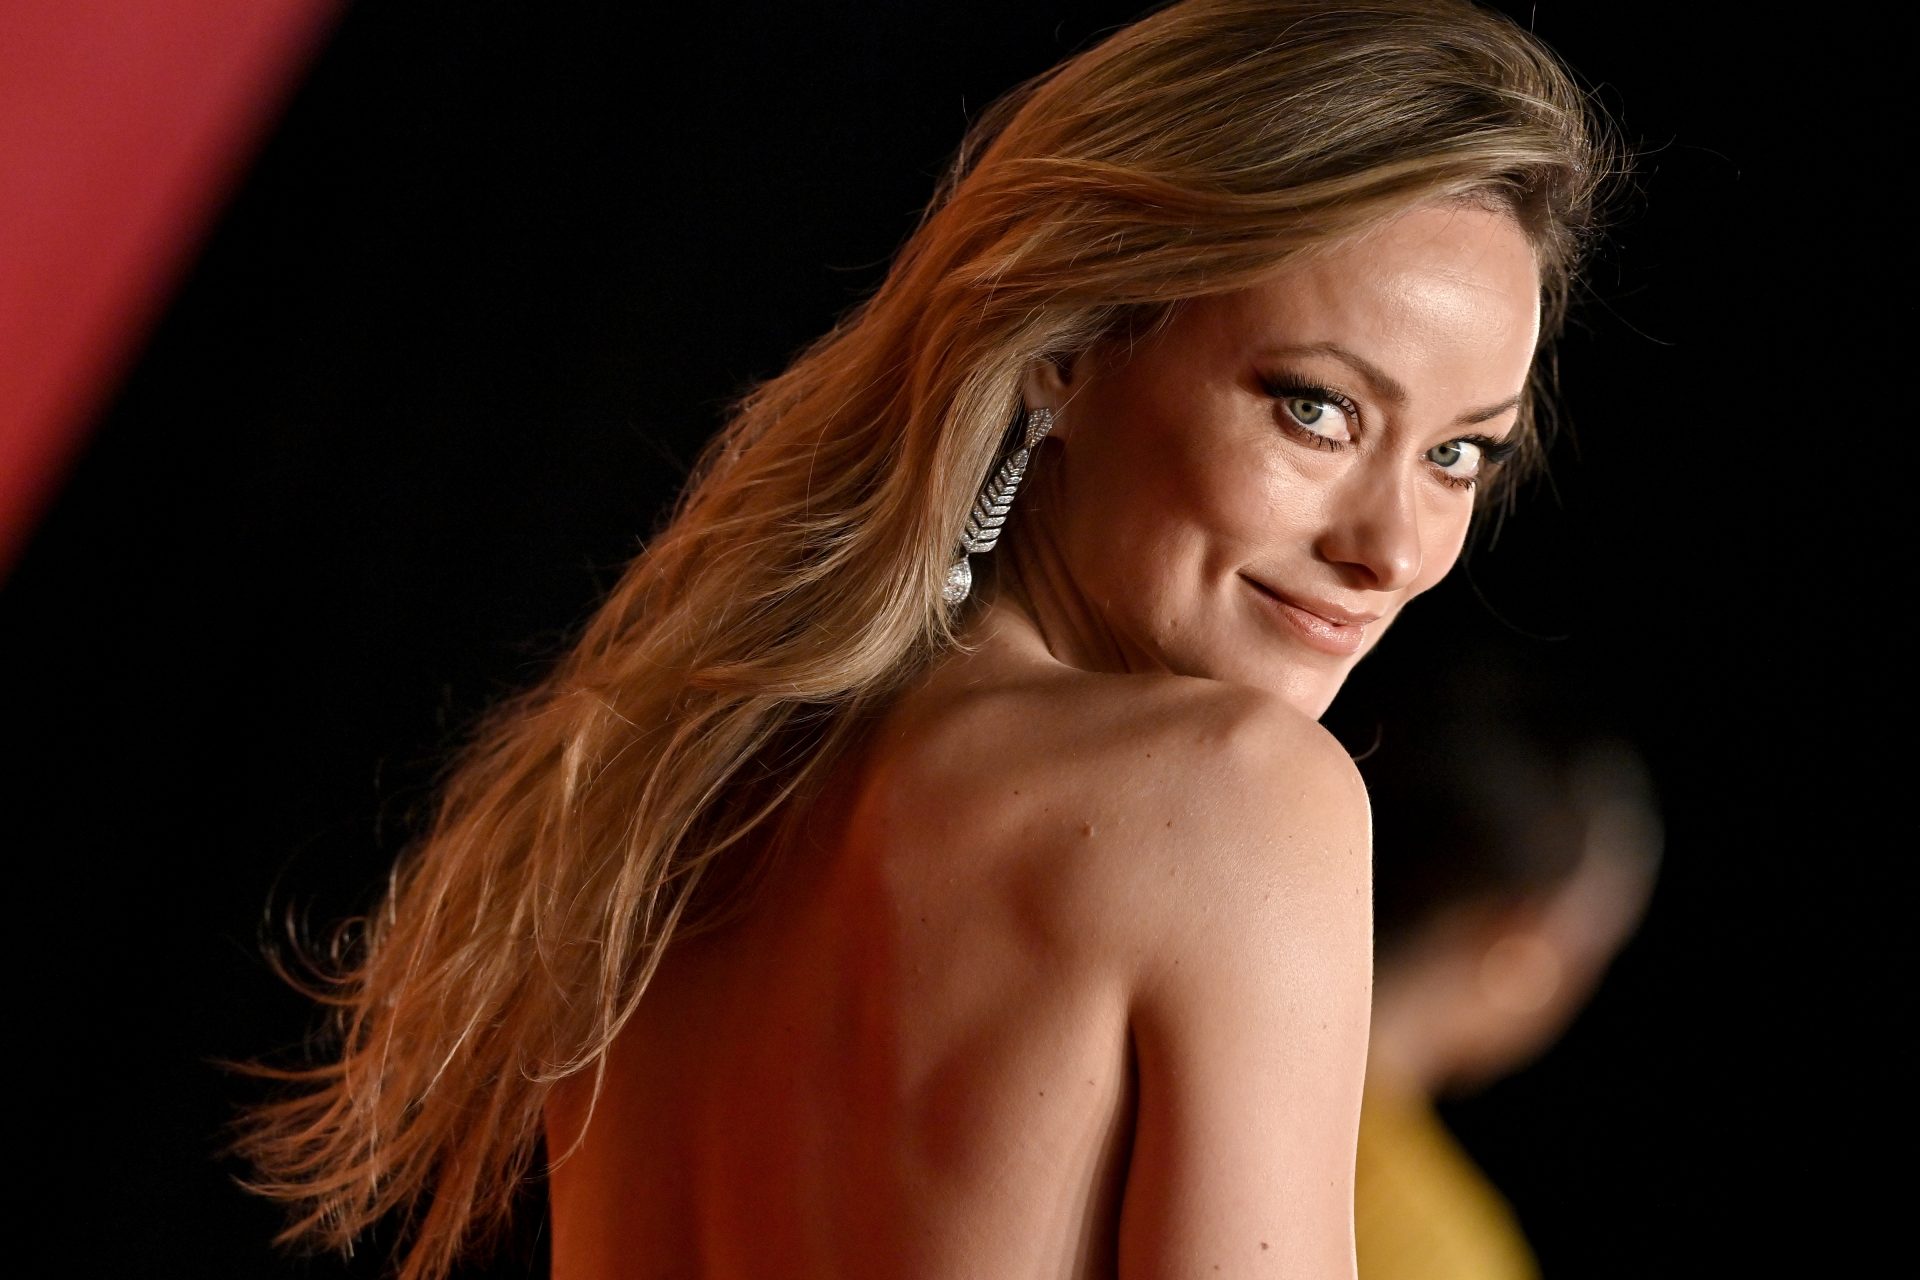 The story of Olivia Wilde in photos